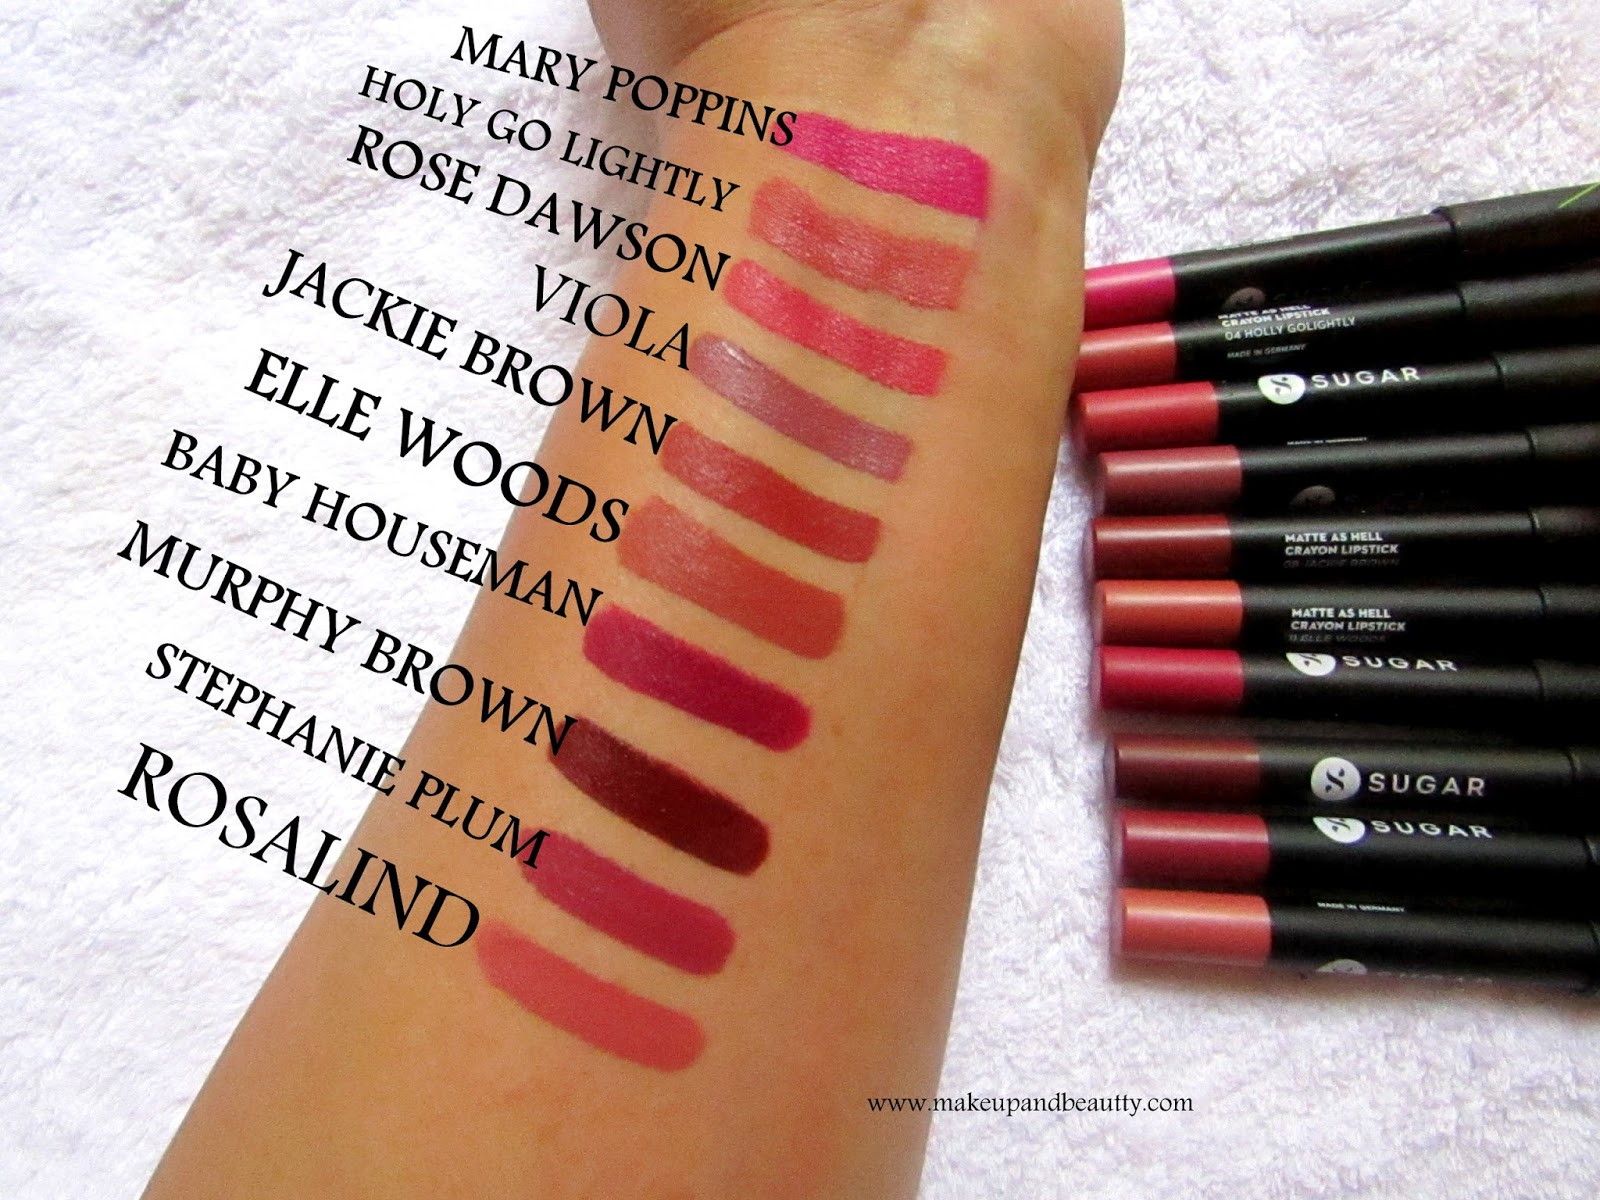 Makeup and beauty !!!: SWATCHES OF SUGAR COSMETICS MATTE AS HELL LIP CRAYON